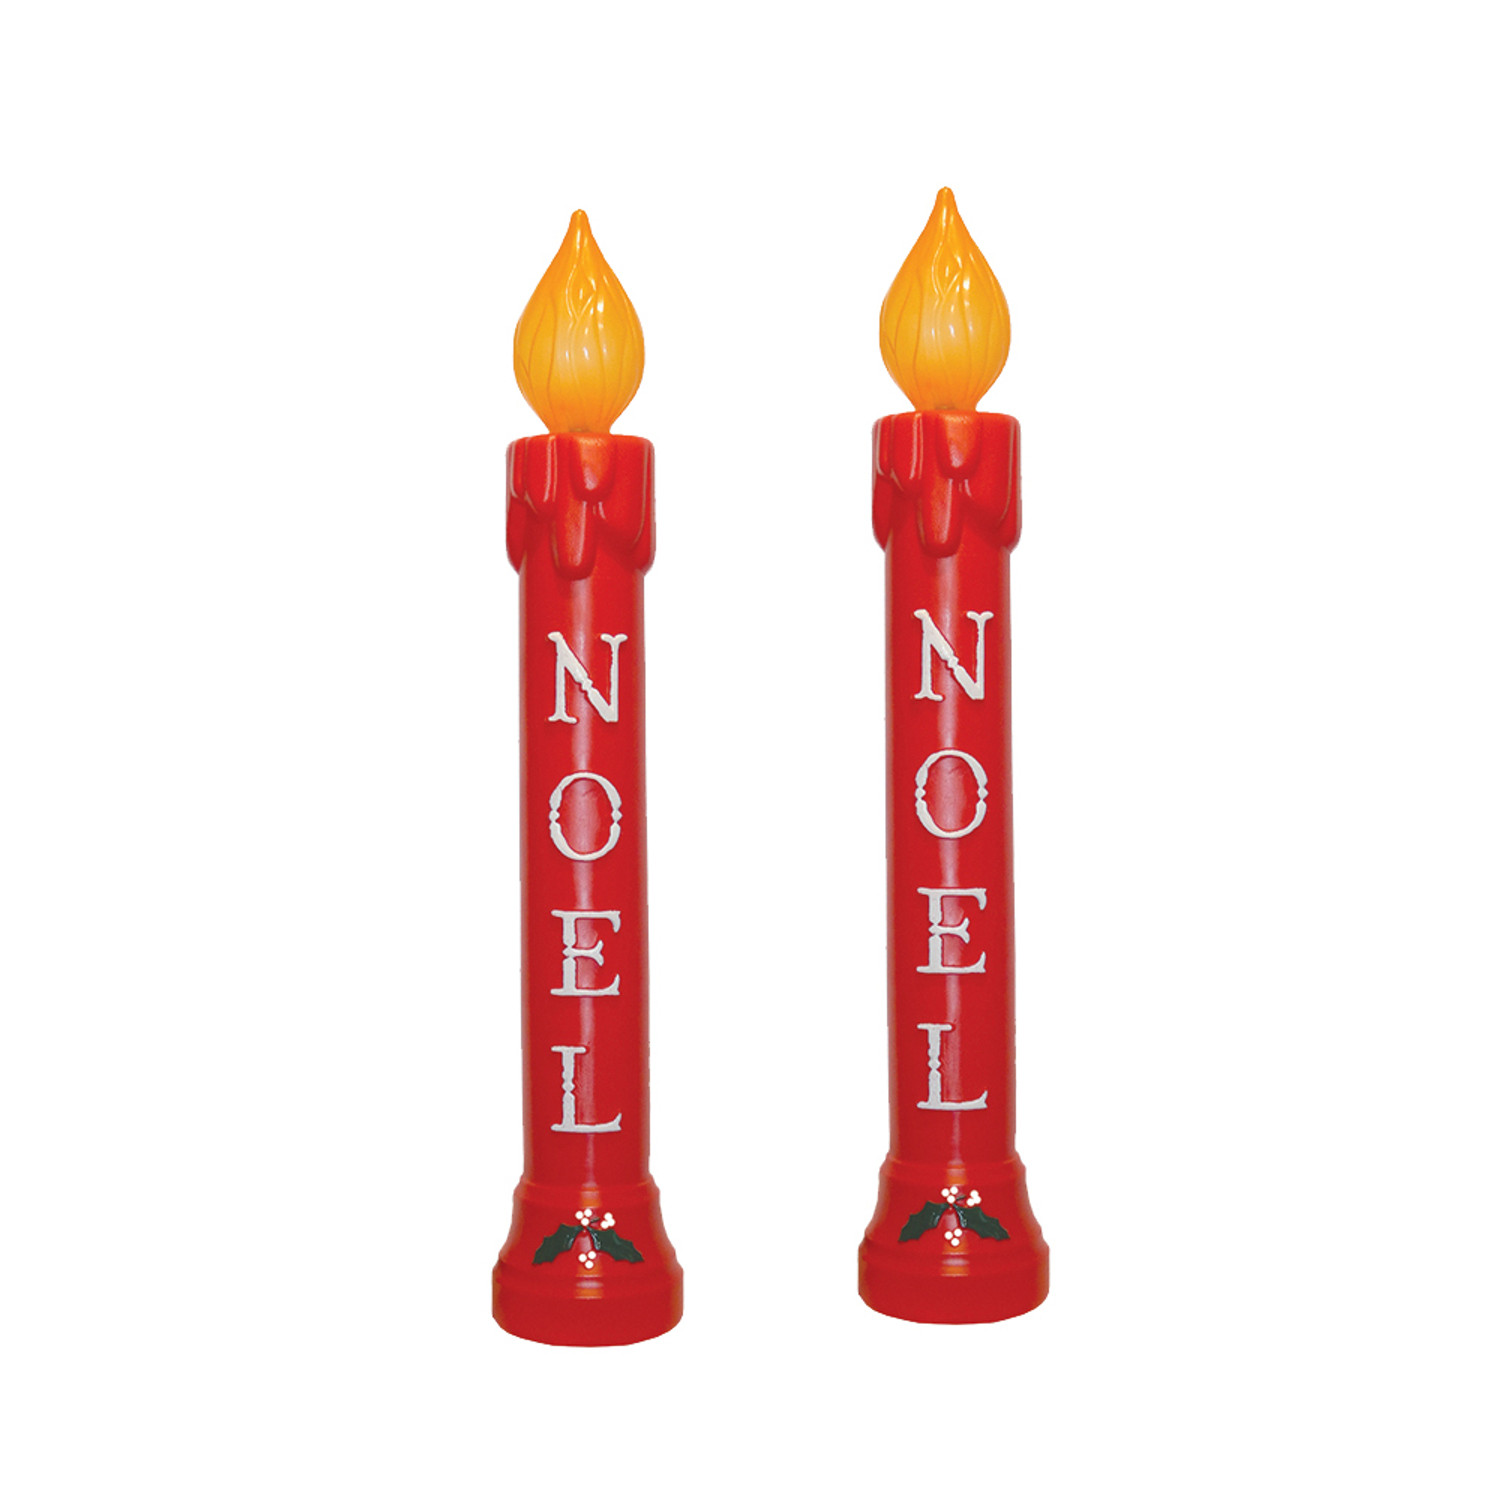 39" Red NOEL Candle Blow Mold Outdoor Christmas Home Decor Christmas Blow  Molds Christmas home decor Outdoor Christmas home decor Lighted  Christmas decor Union Blow Molds